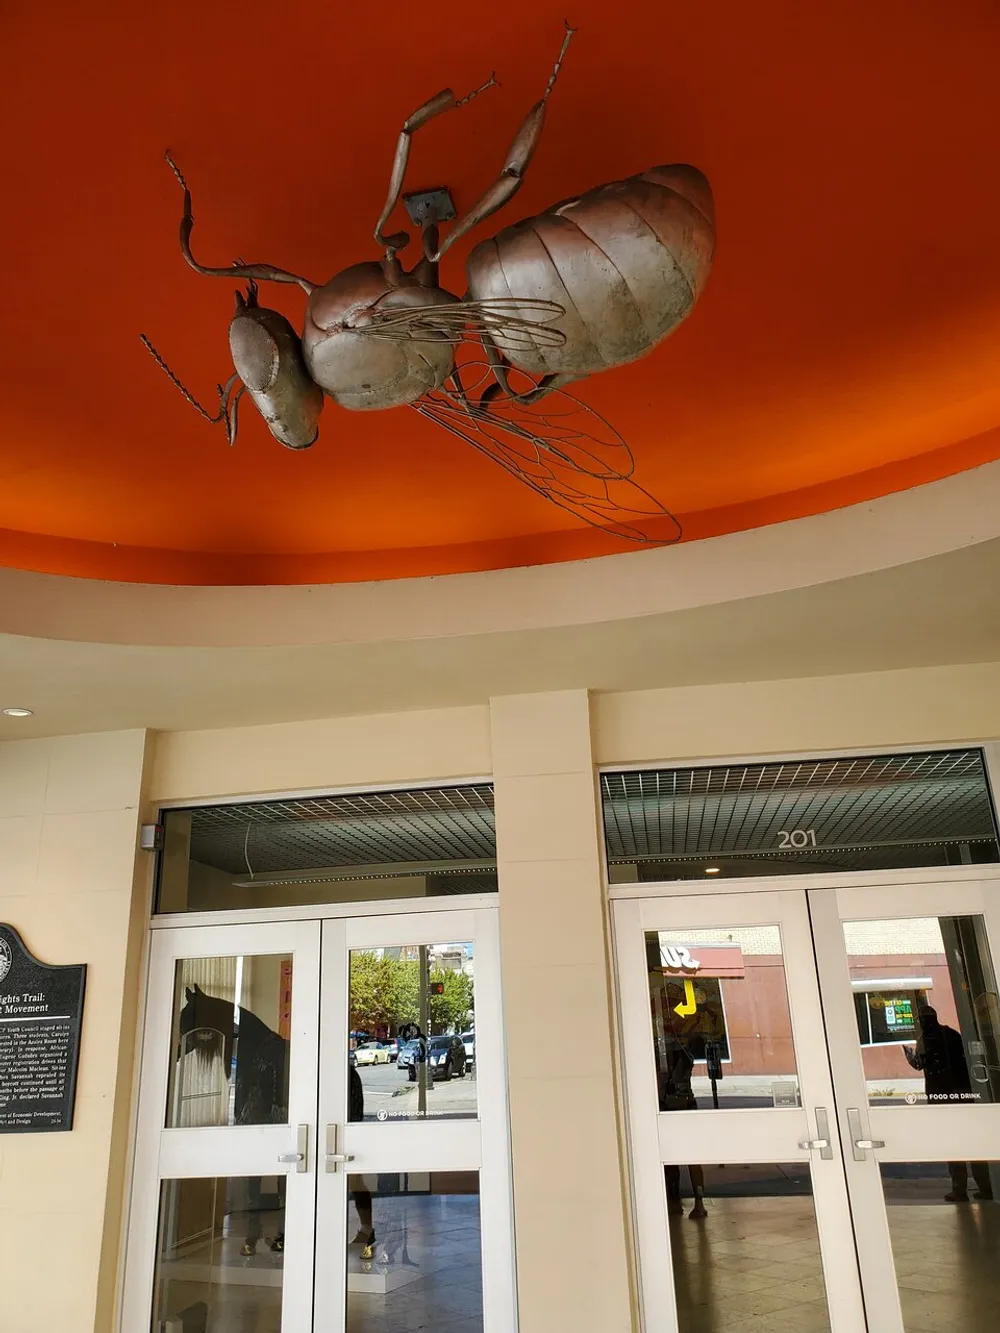 A large metal sculpture of an ant hangs from an orange ceiling above the entrance to a building